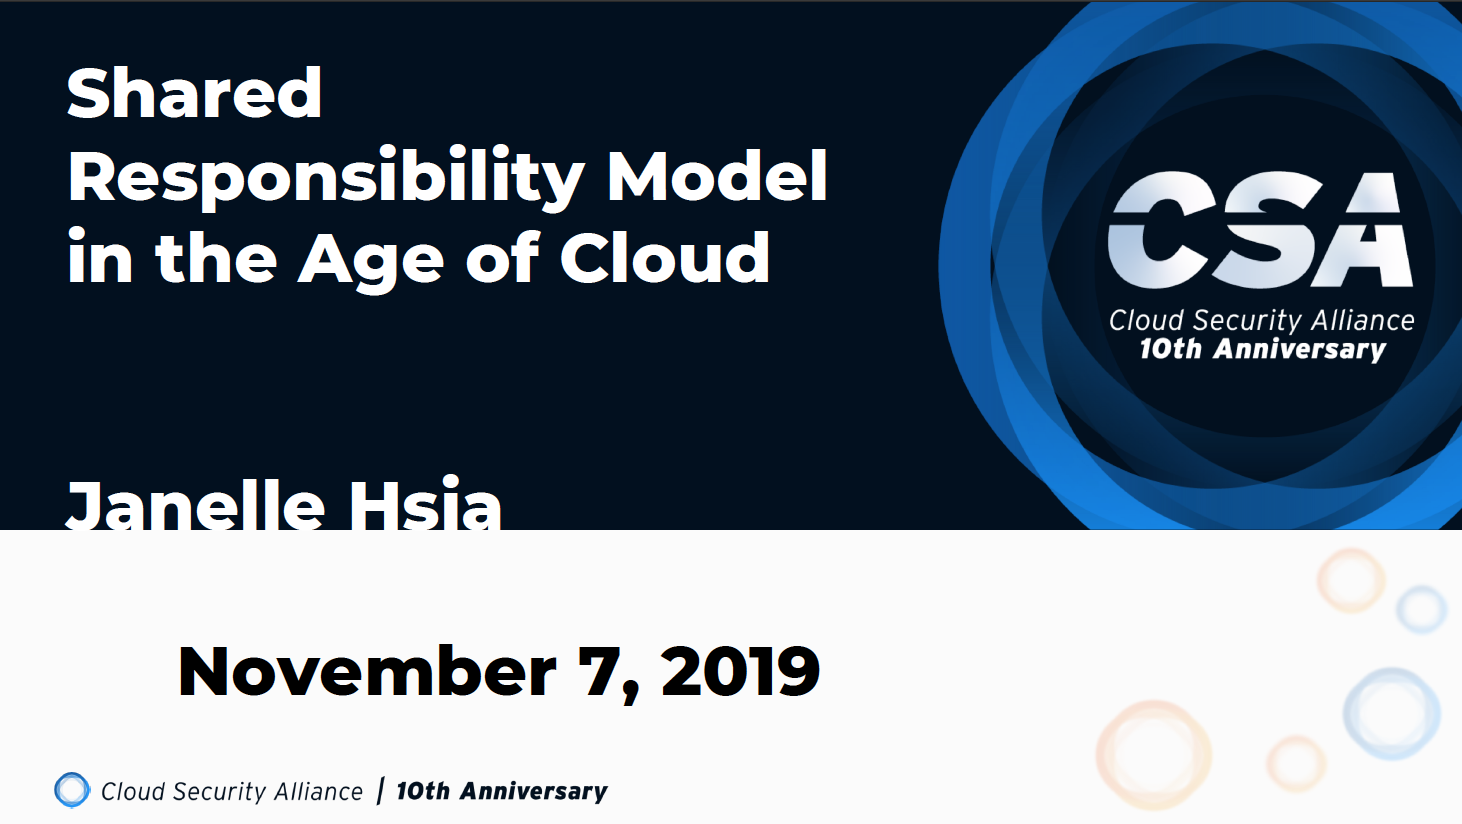 Shared Responsibility Model in the Age of Cloud - Janelle Hsia